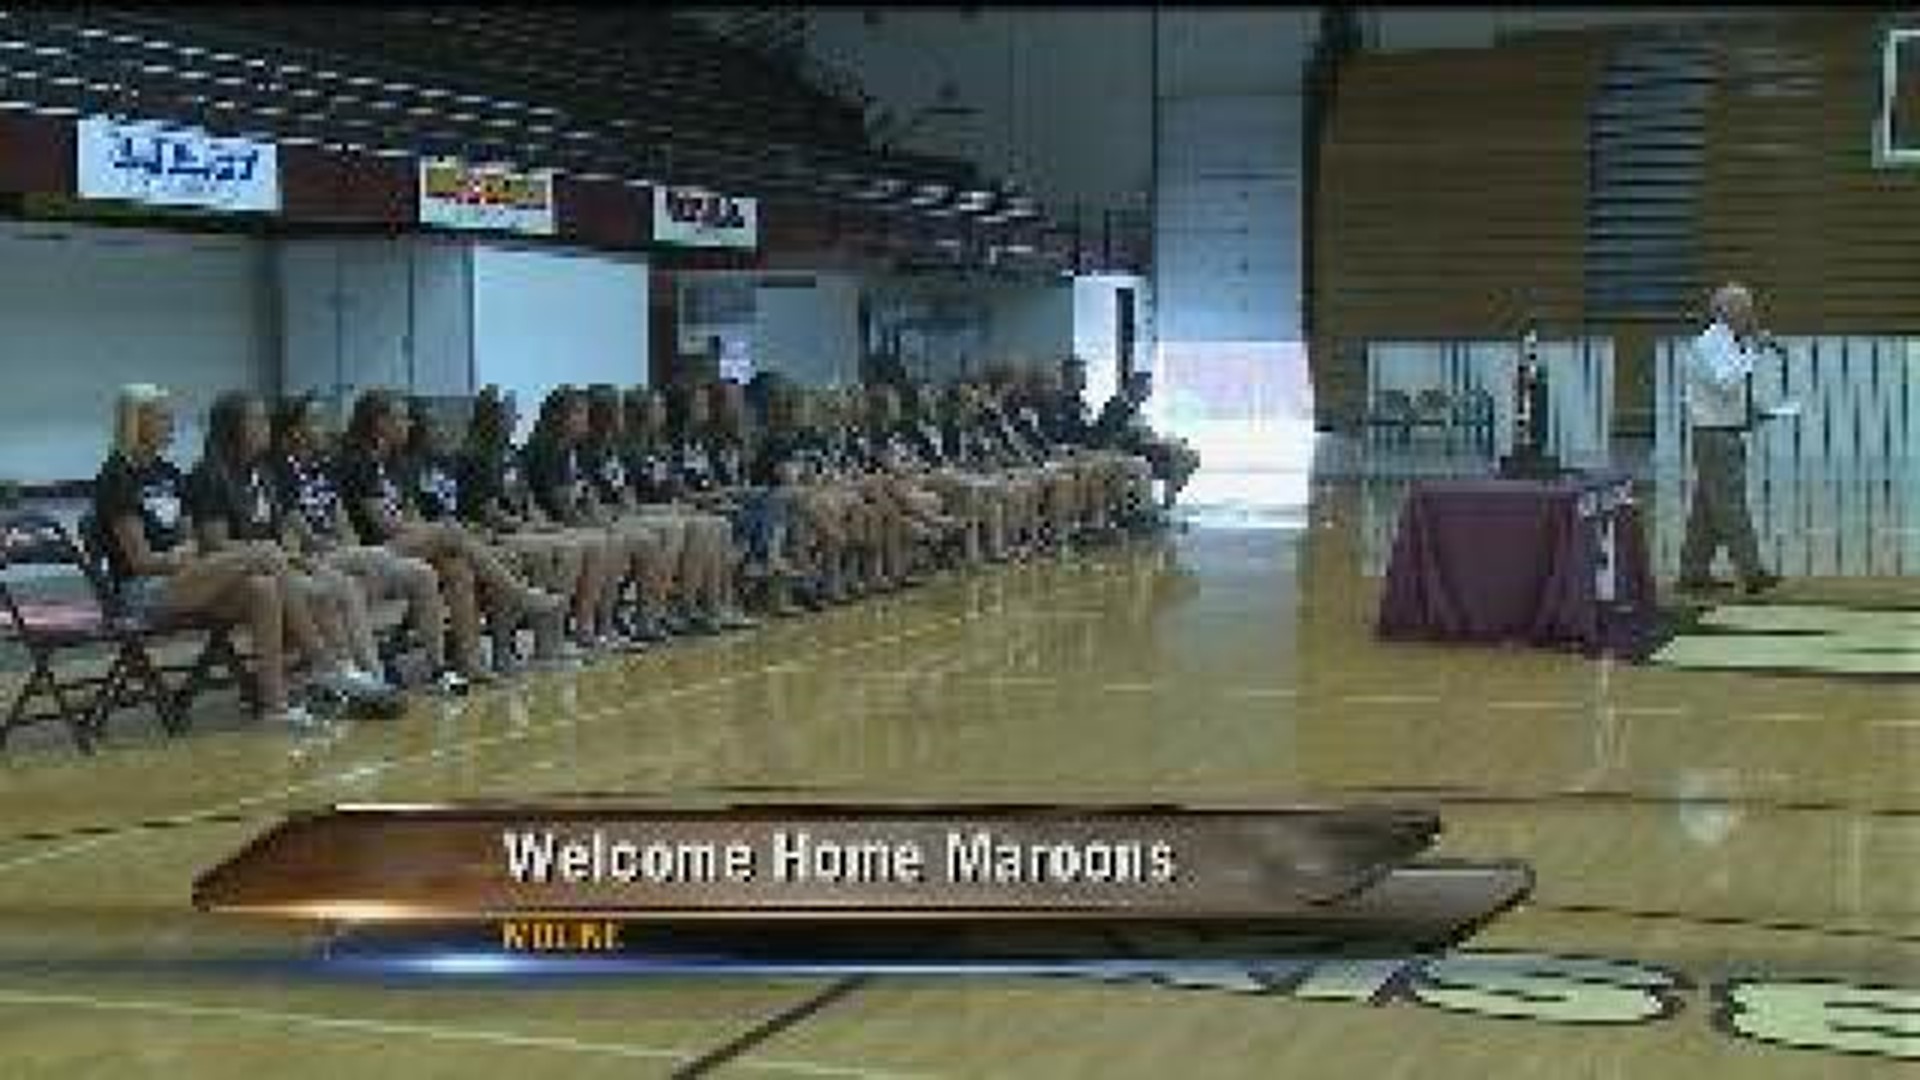 Moline Softball Team Welcomed Home After Taking 3rd at State